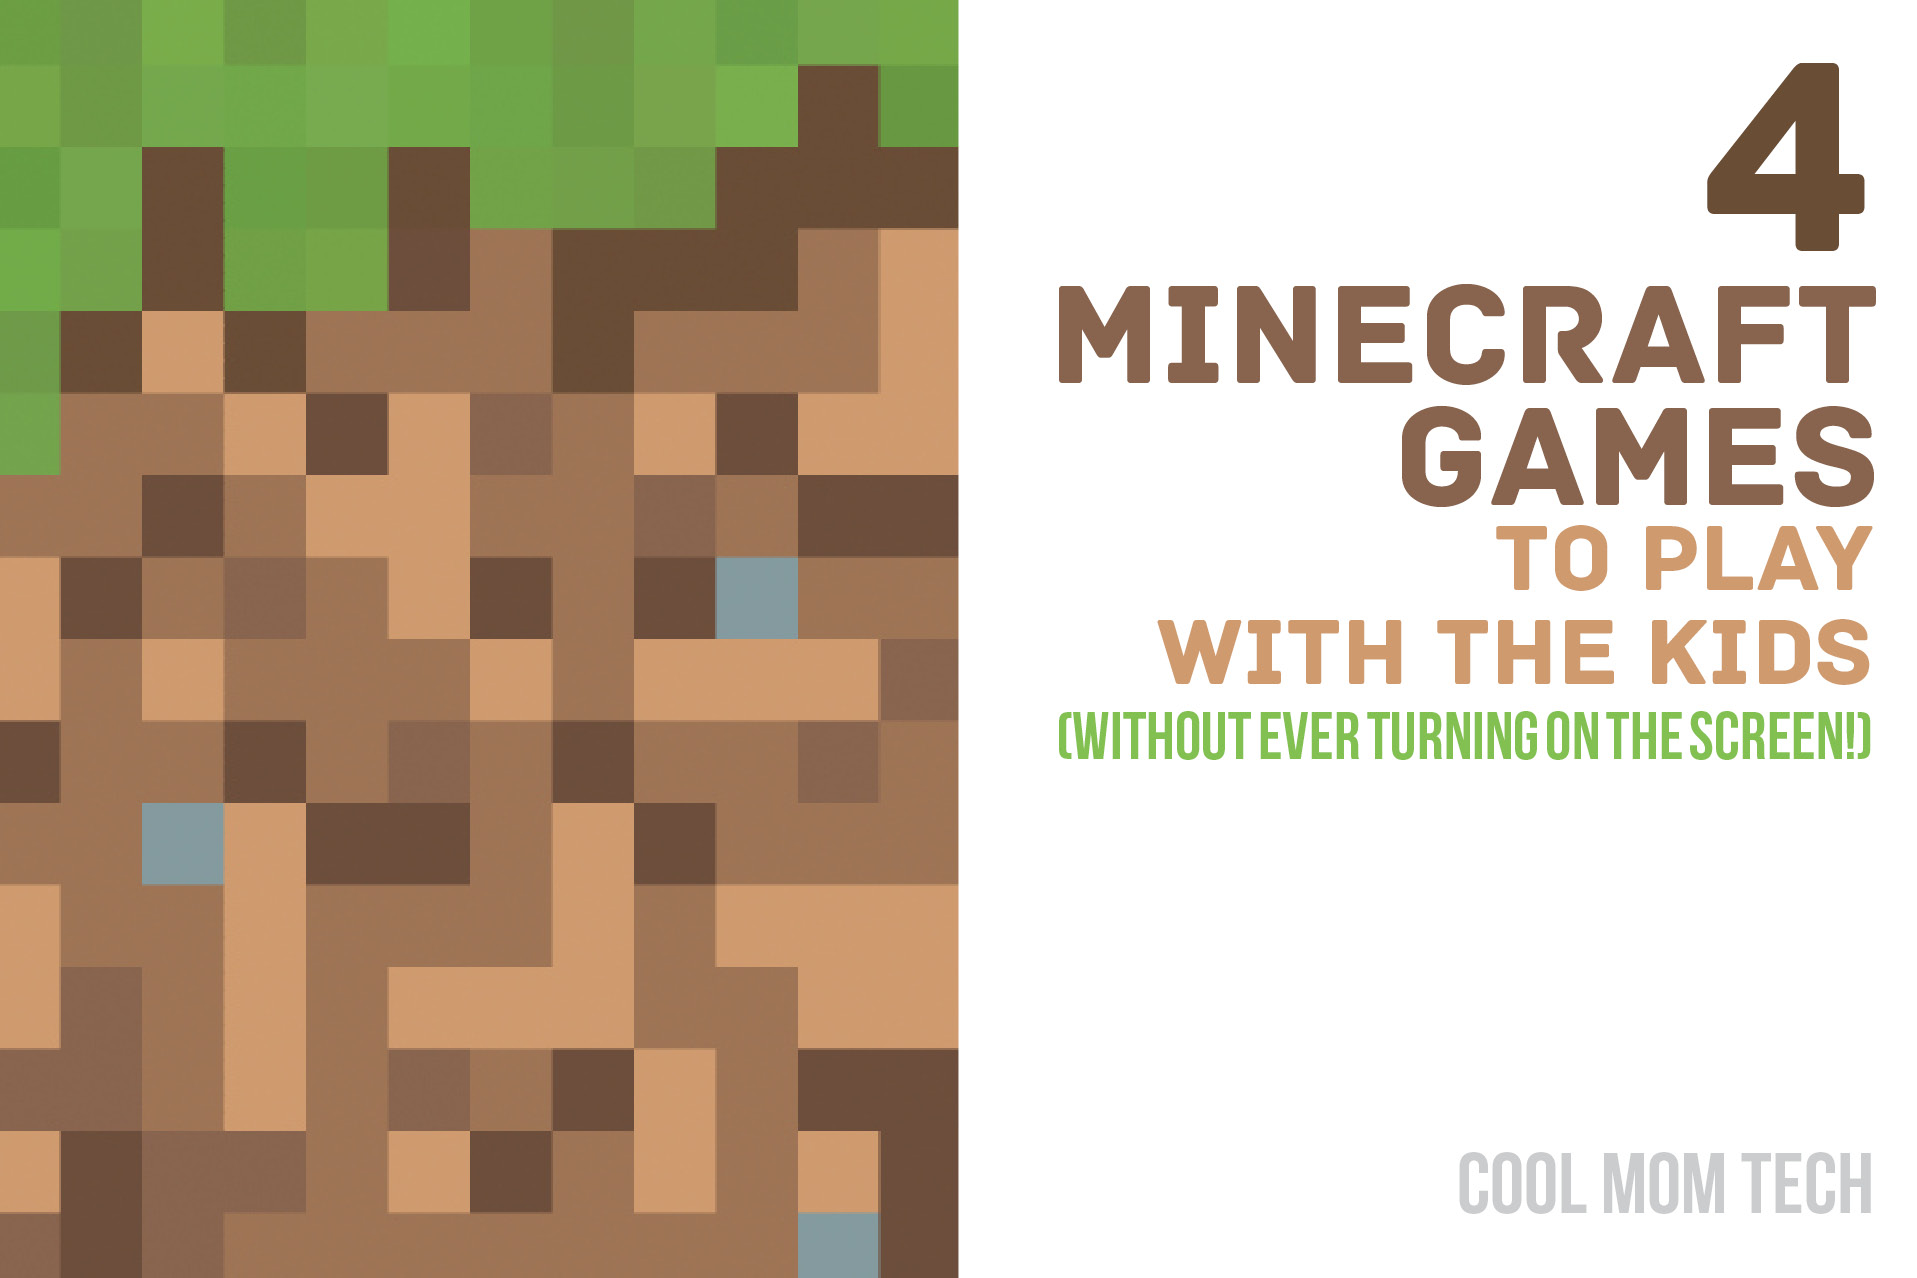 4 ideas for Minecraft games to play with the kids – without even turning on the screen.